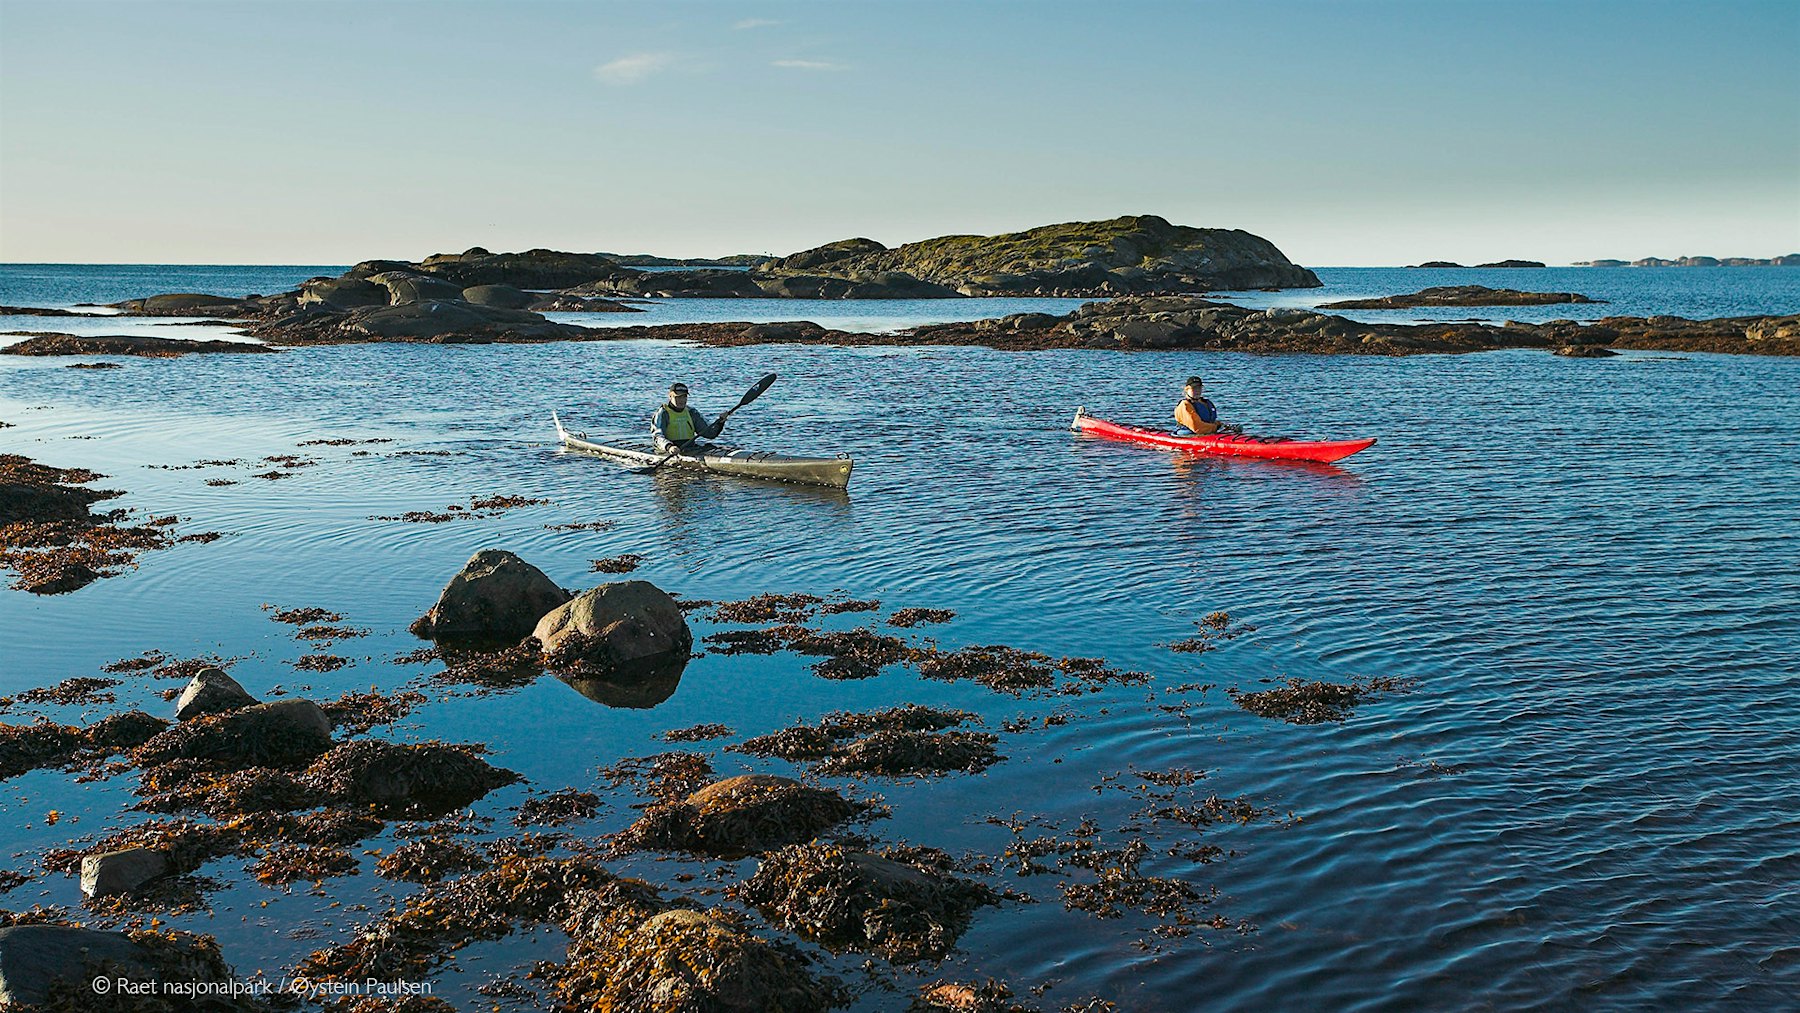 Two kayakers on the sea, with rocky cliffs around. Photo